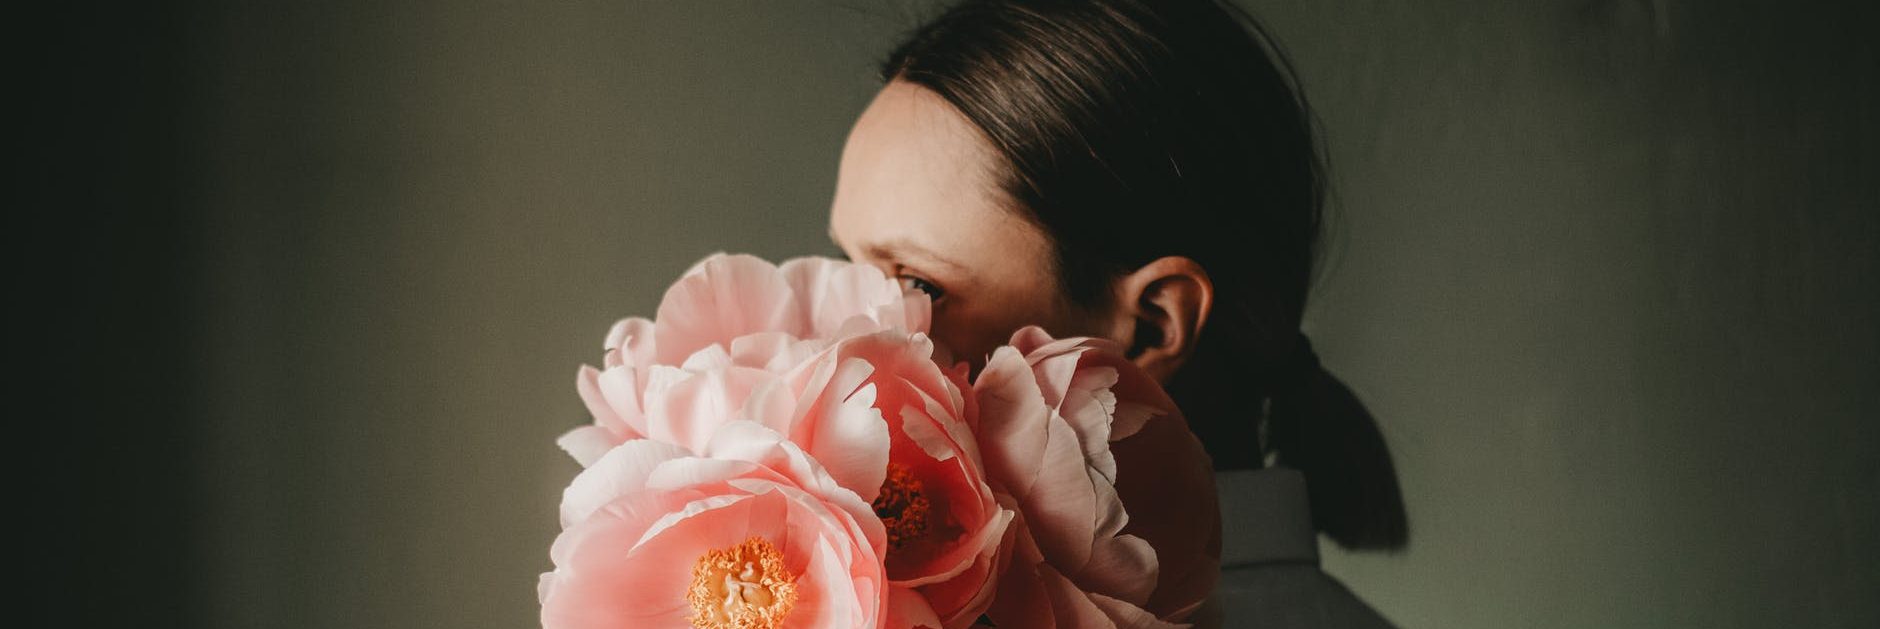 young female covering face with bouquet of flowers in dark room